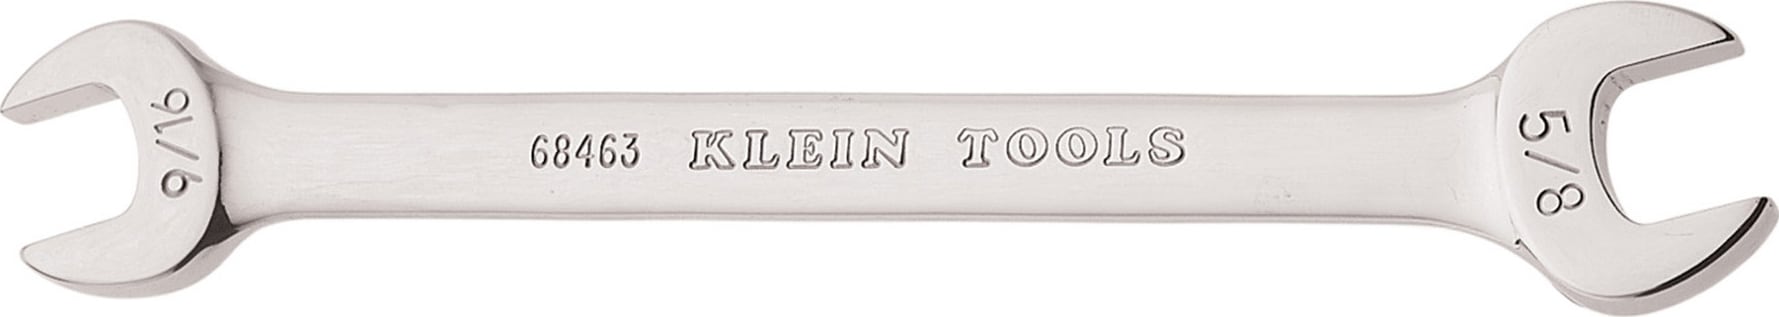 Klein Tools 68460 Open-End Wrench 1/4", 5/16" Ends